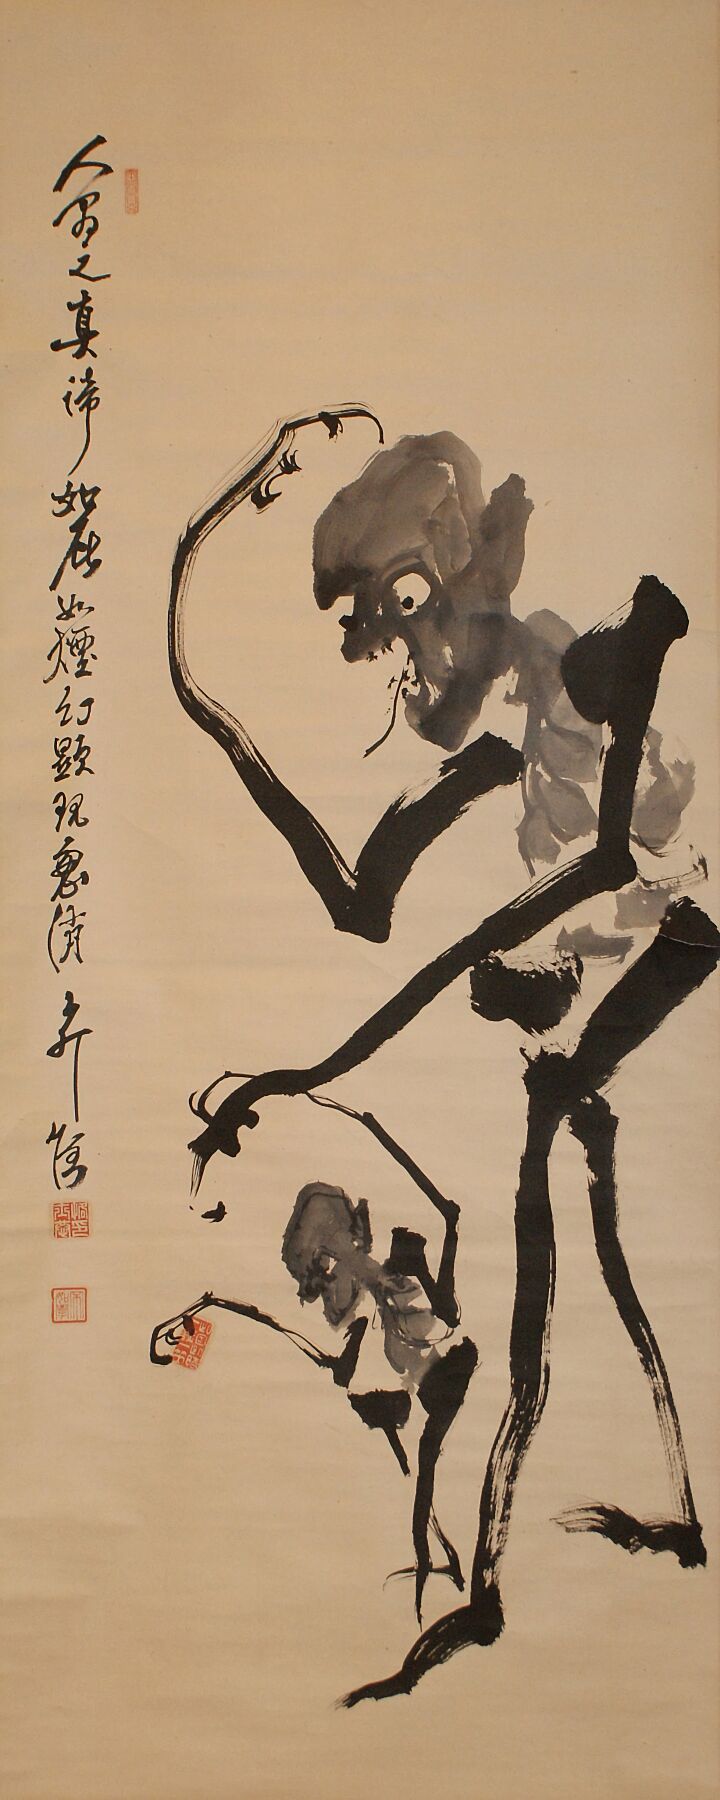 Skeleton Father and Son Doing the Bon Dance by Doi Gōga - c. 1850s